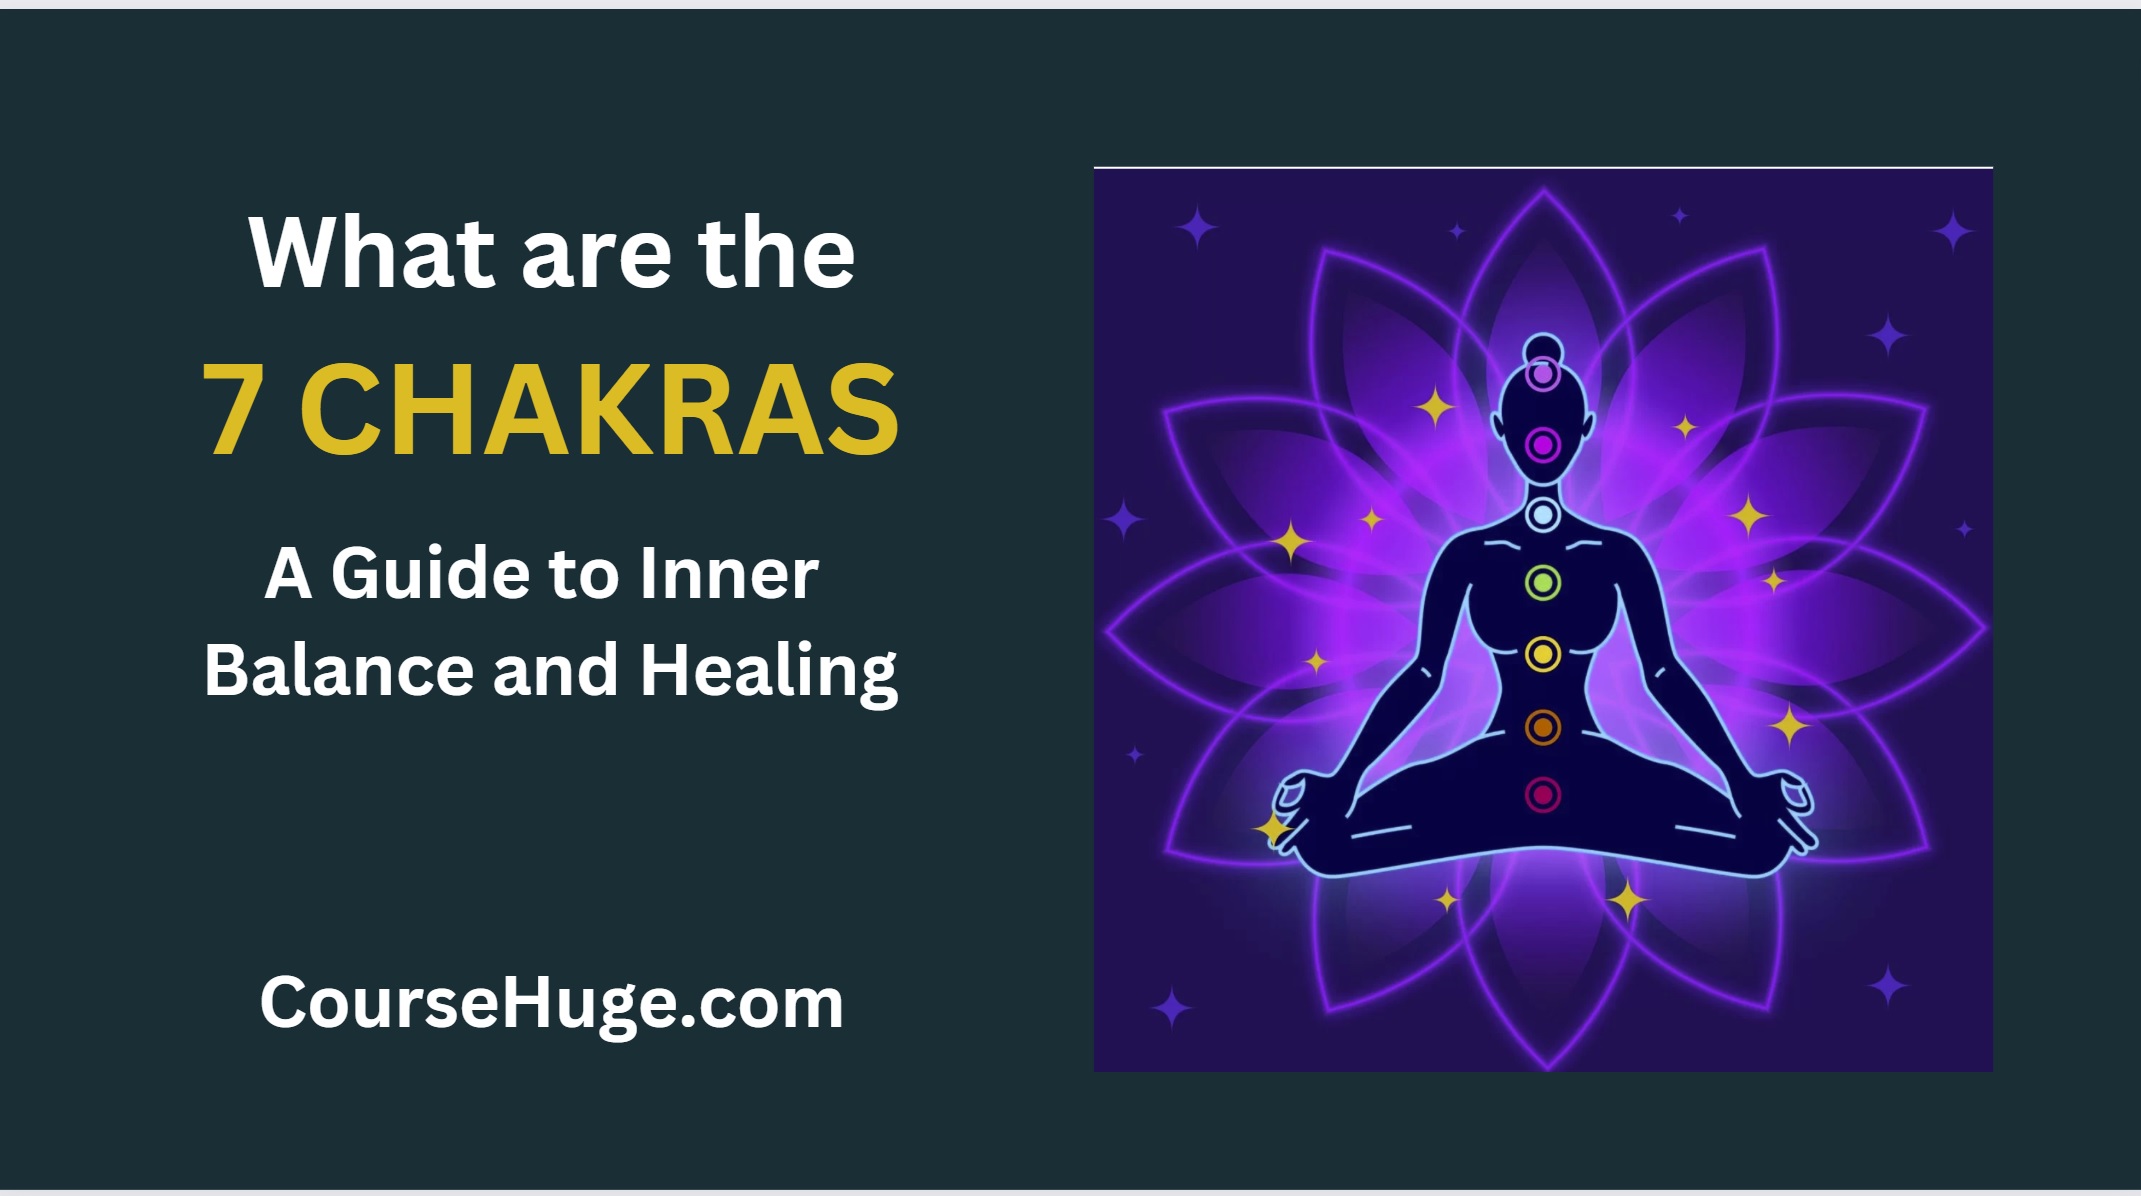 What Are The 7 Chakras? A Guide To Inner Balance And Healing